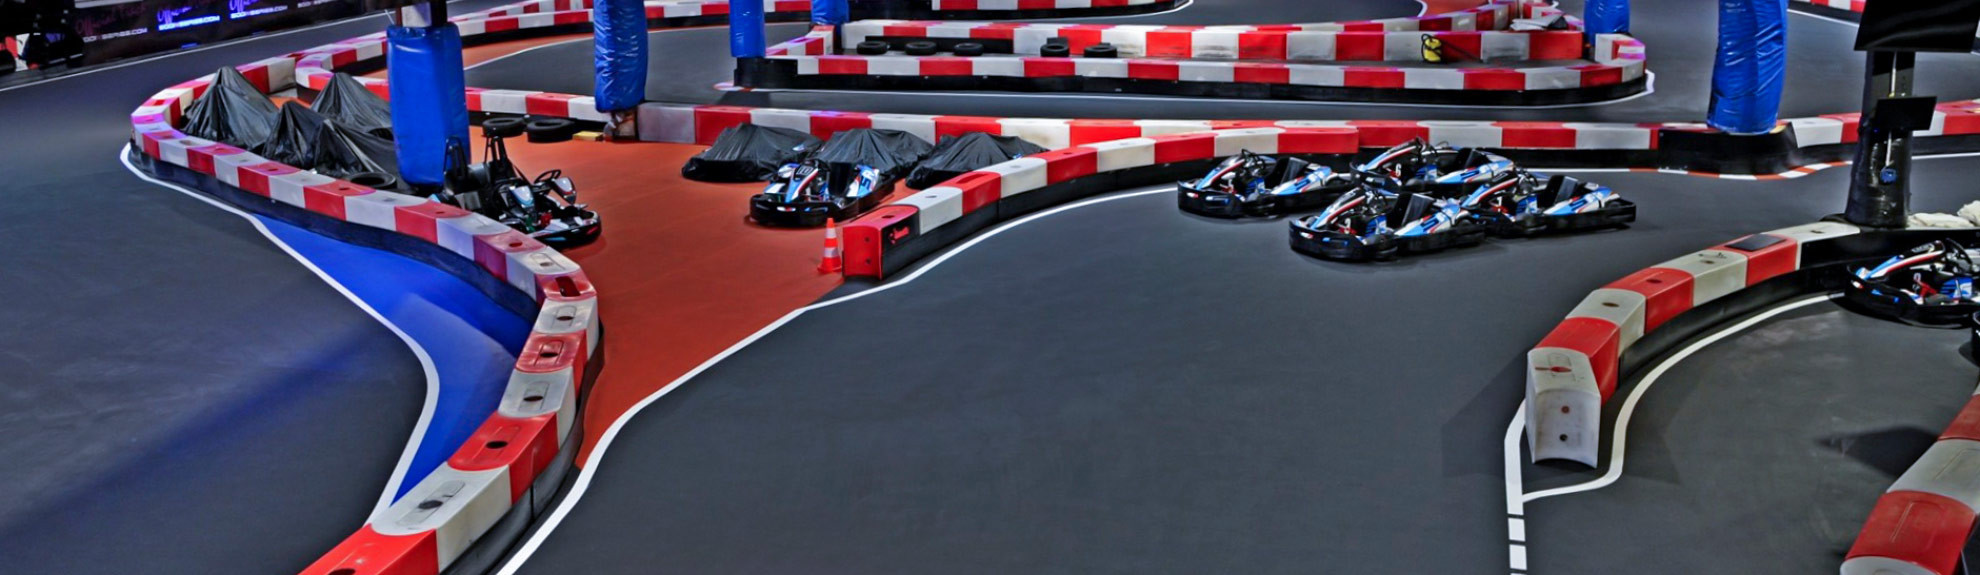 Kart track realized by a third party using Vesmaco's materials - France (2020)